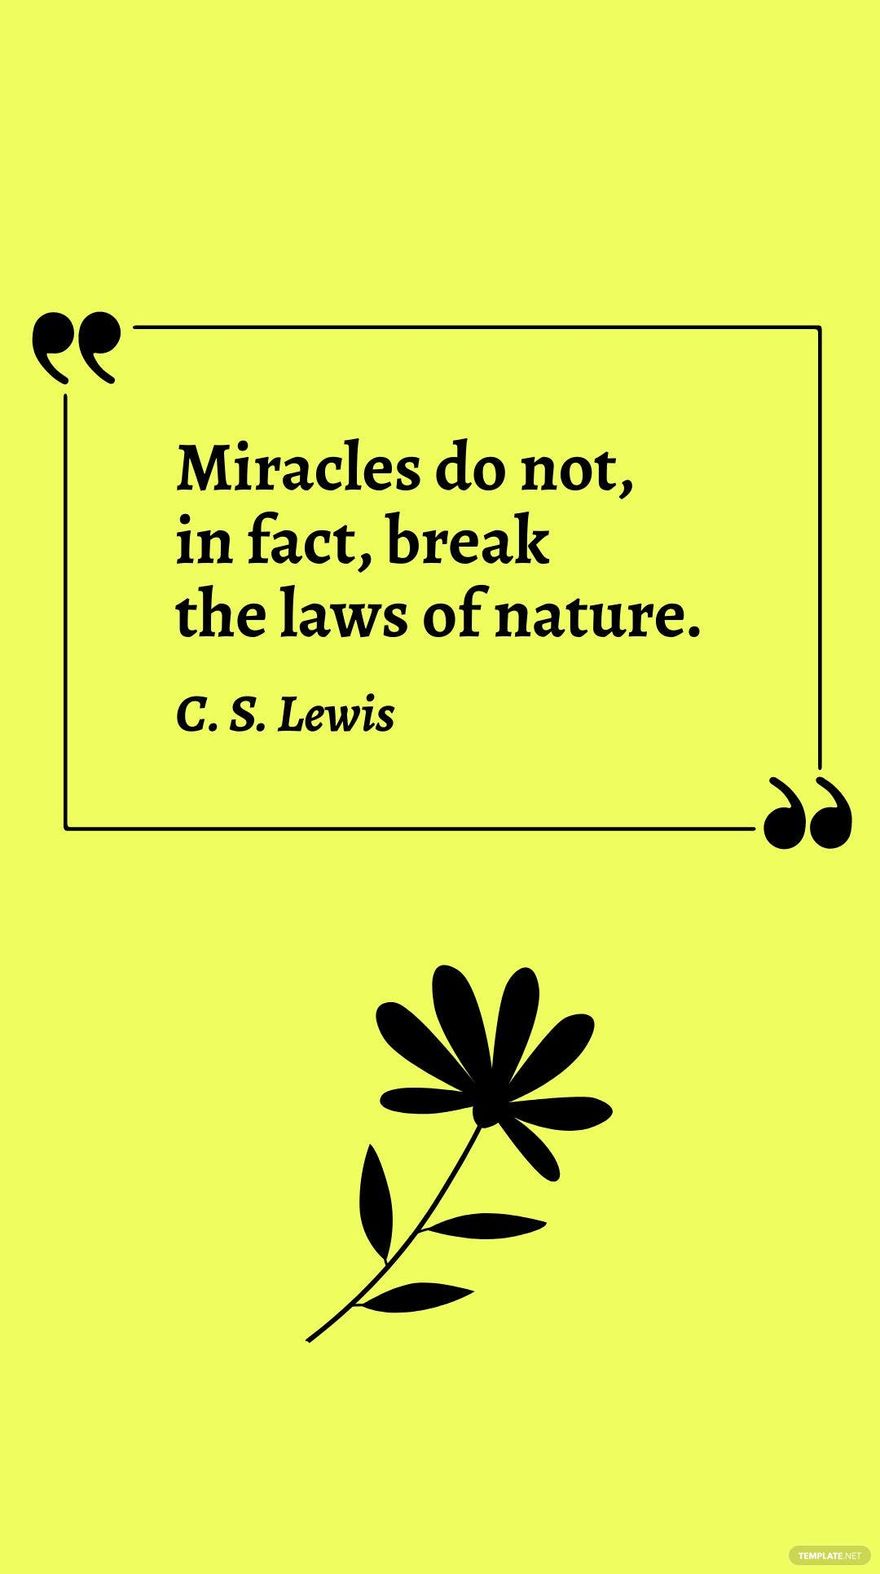 C. S. Lewis - Miracles do not, in fact, break the laws of nature. in JPG